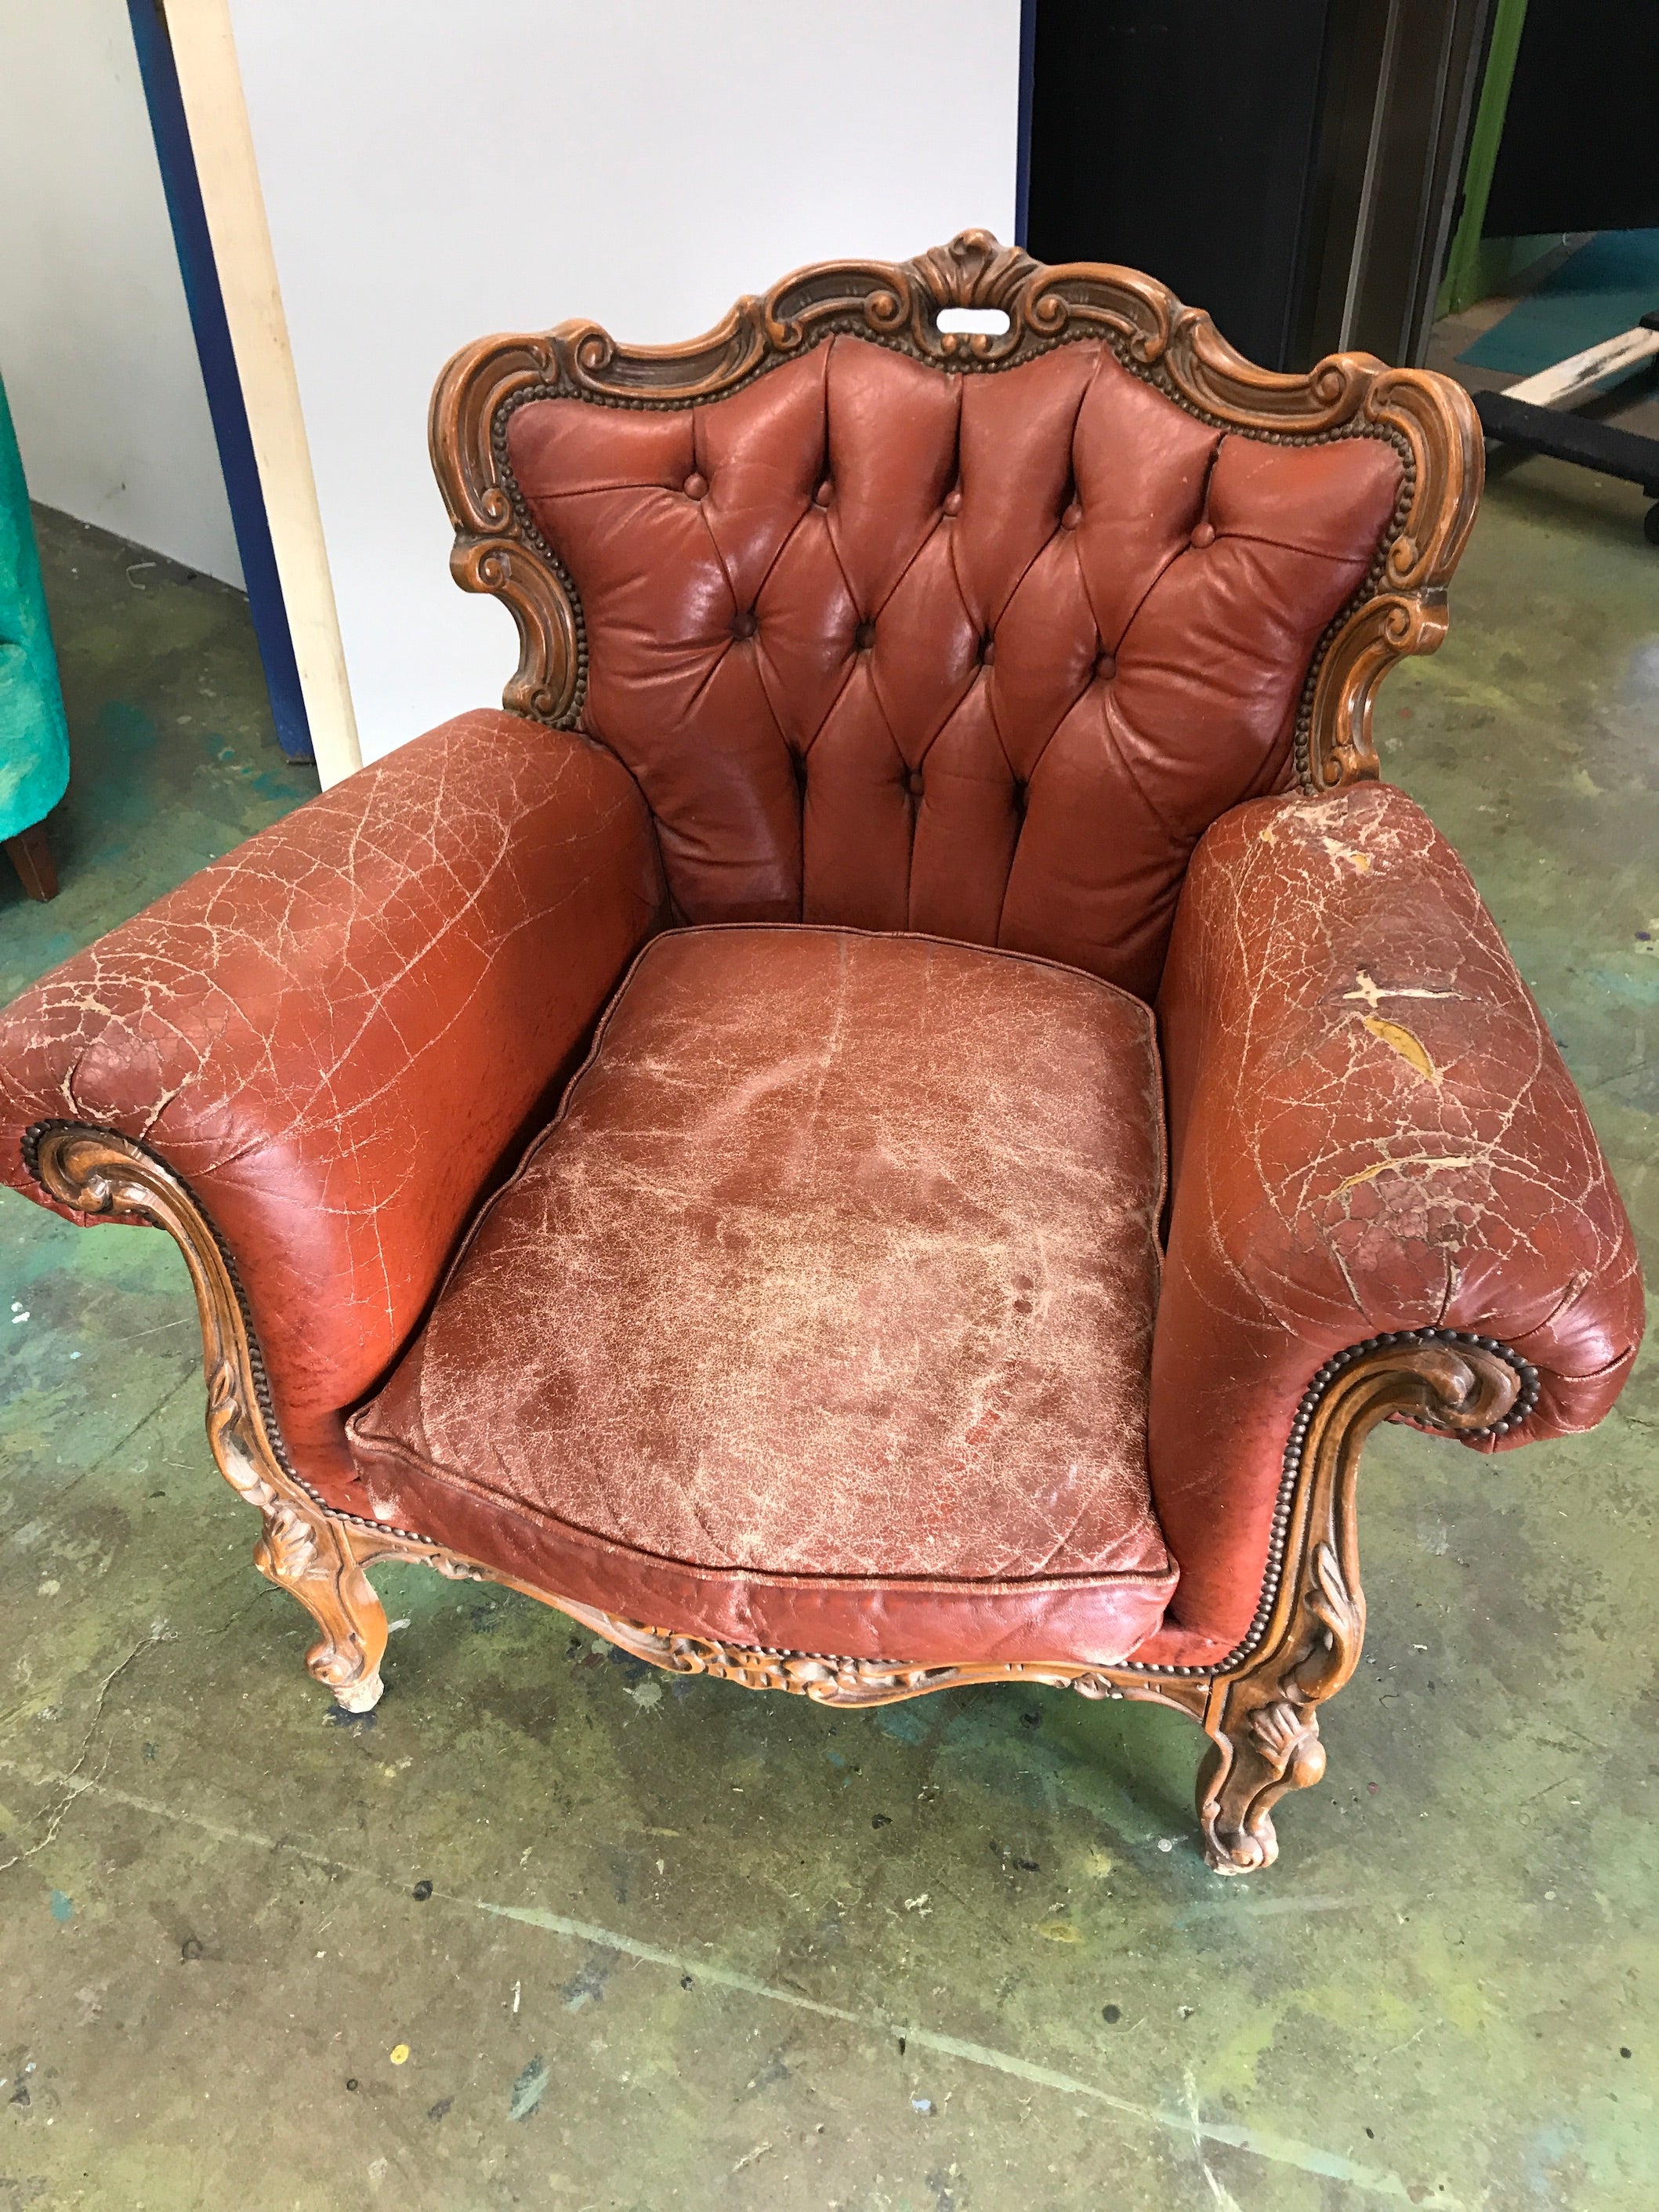 Can You Really Paint Leather Furniture? Yes! You Can! – Tanglewood Works